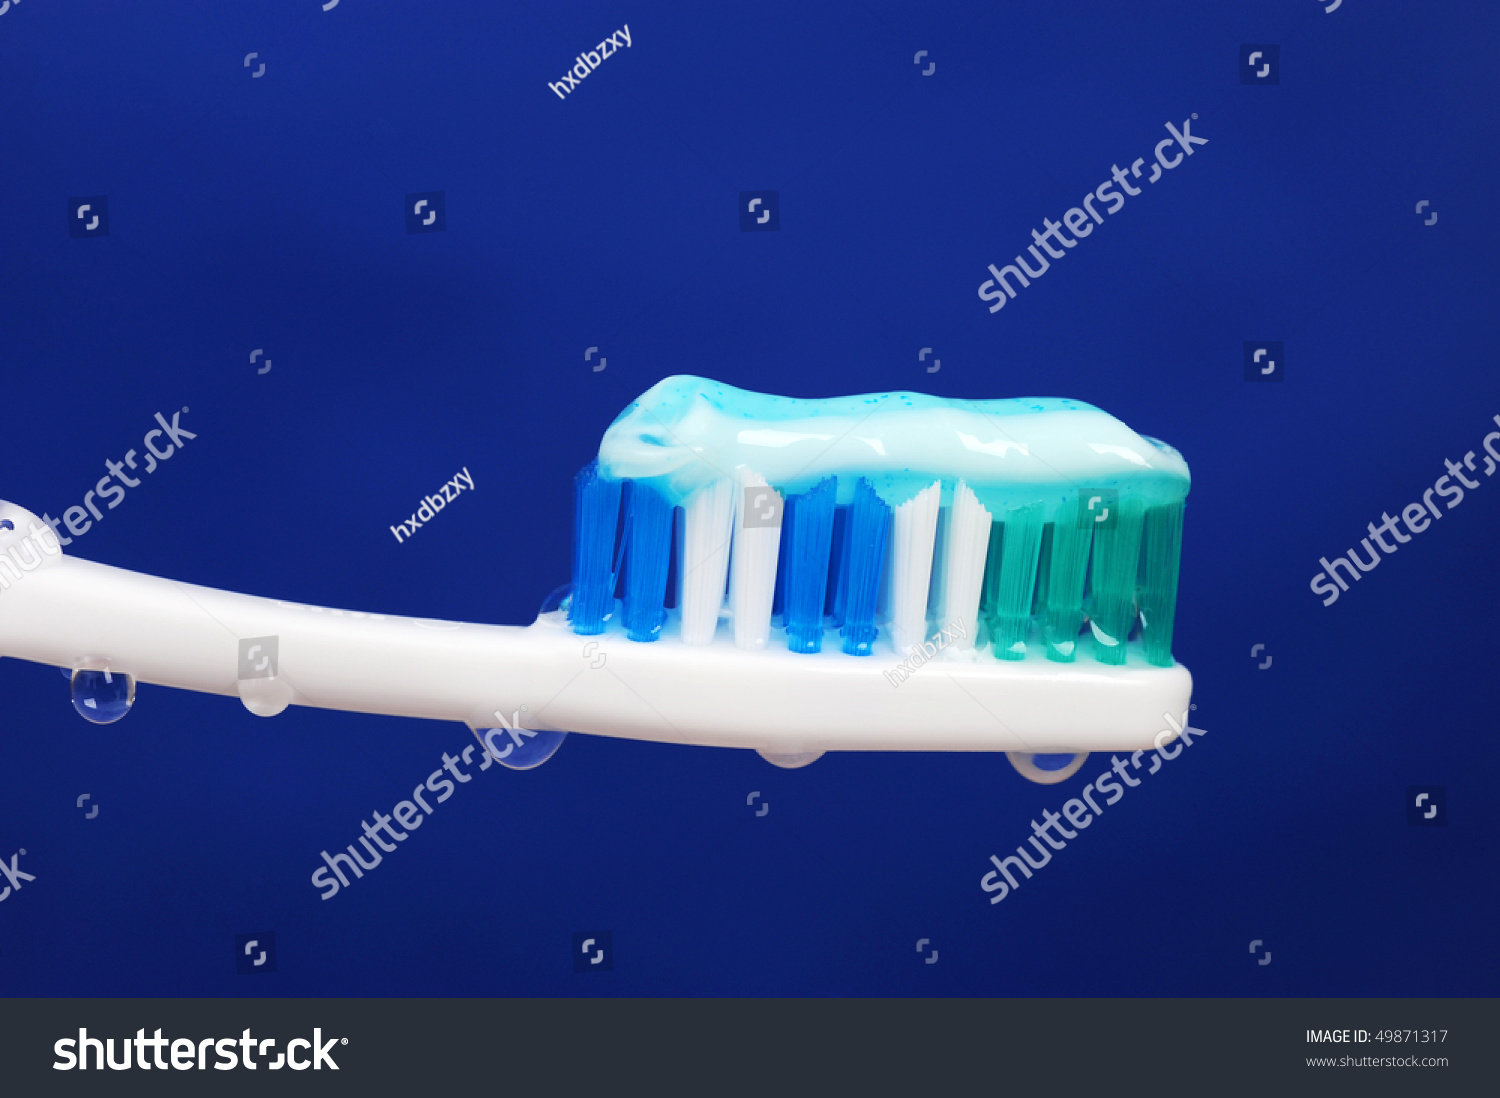 A Wet Toothbrush With Some Toothpaste On It, And Drops Of Water Over ...